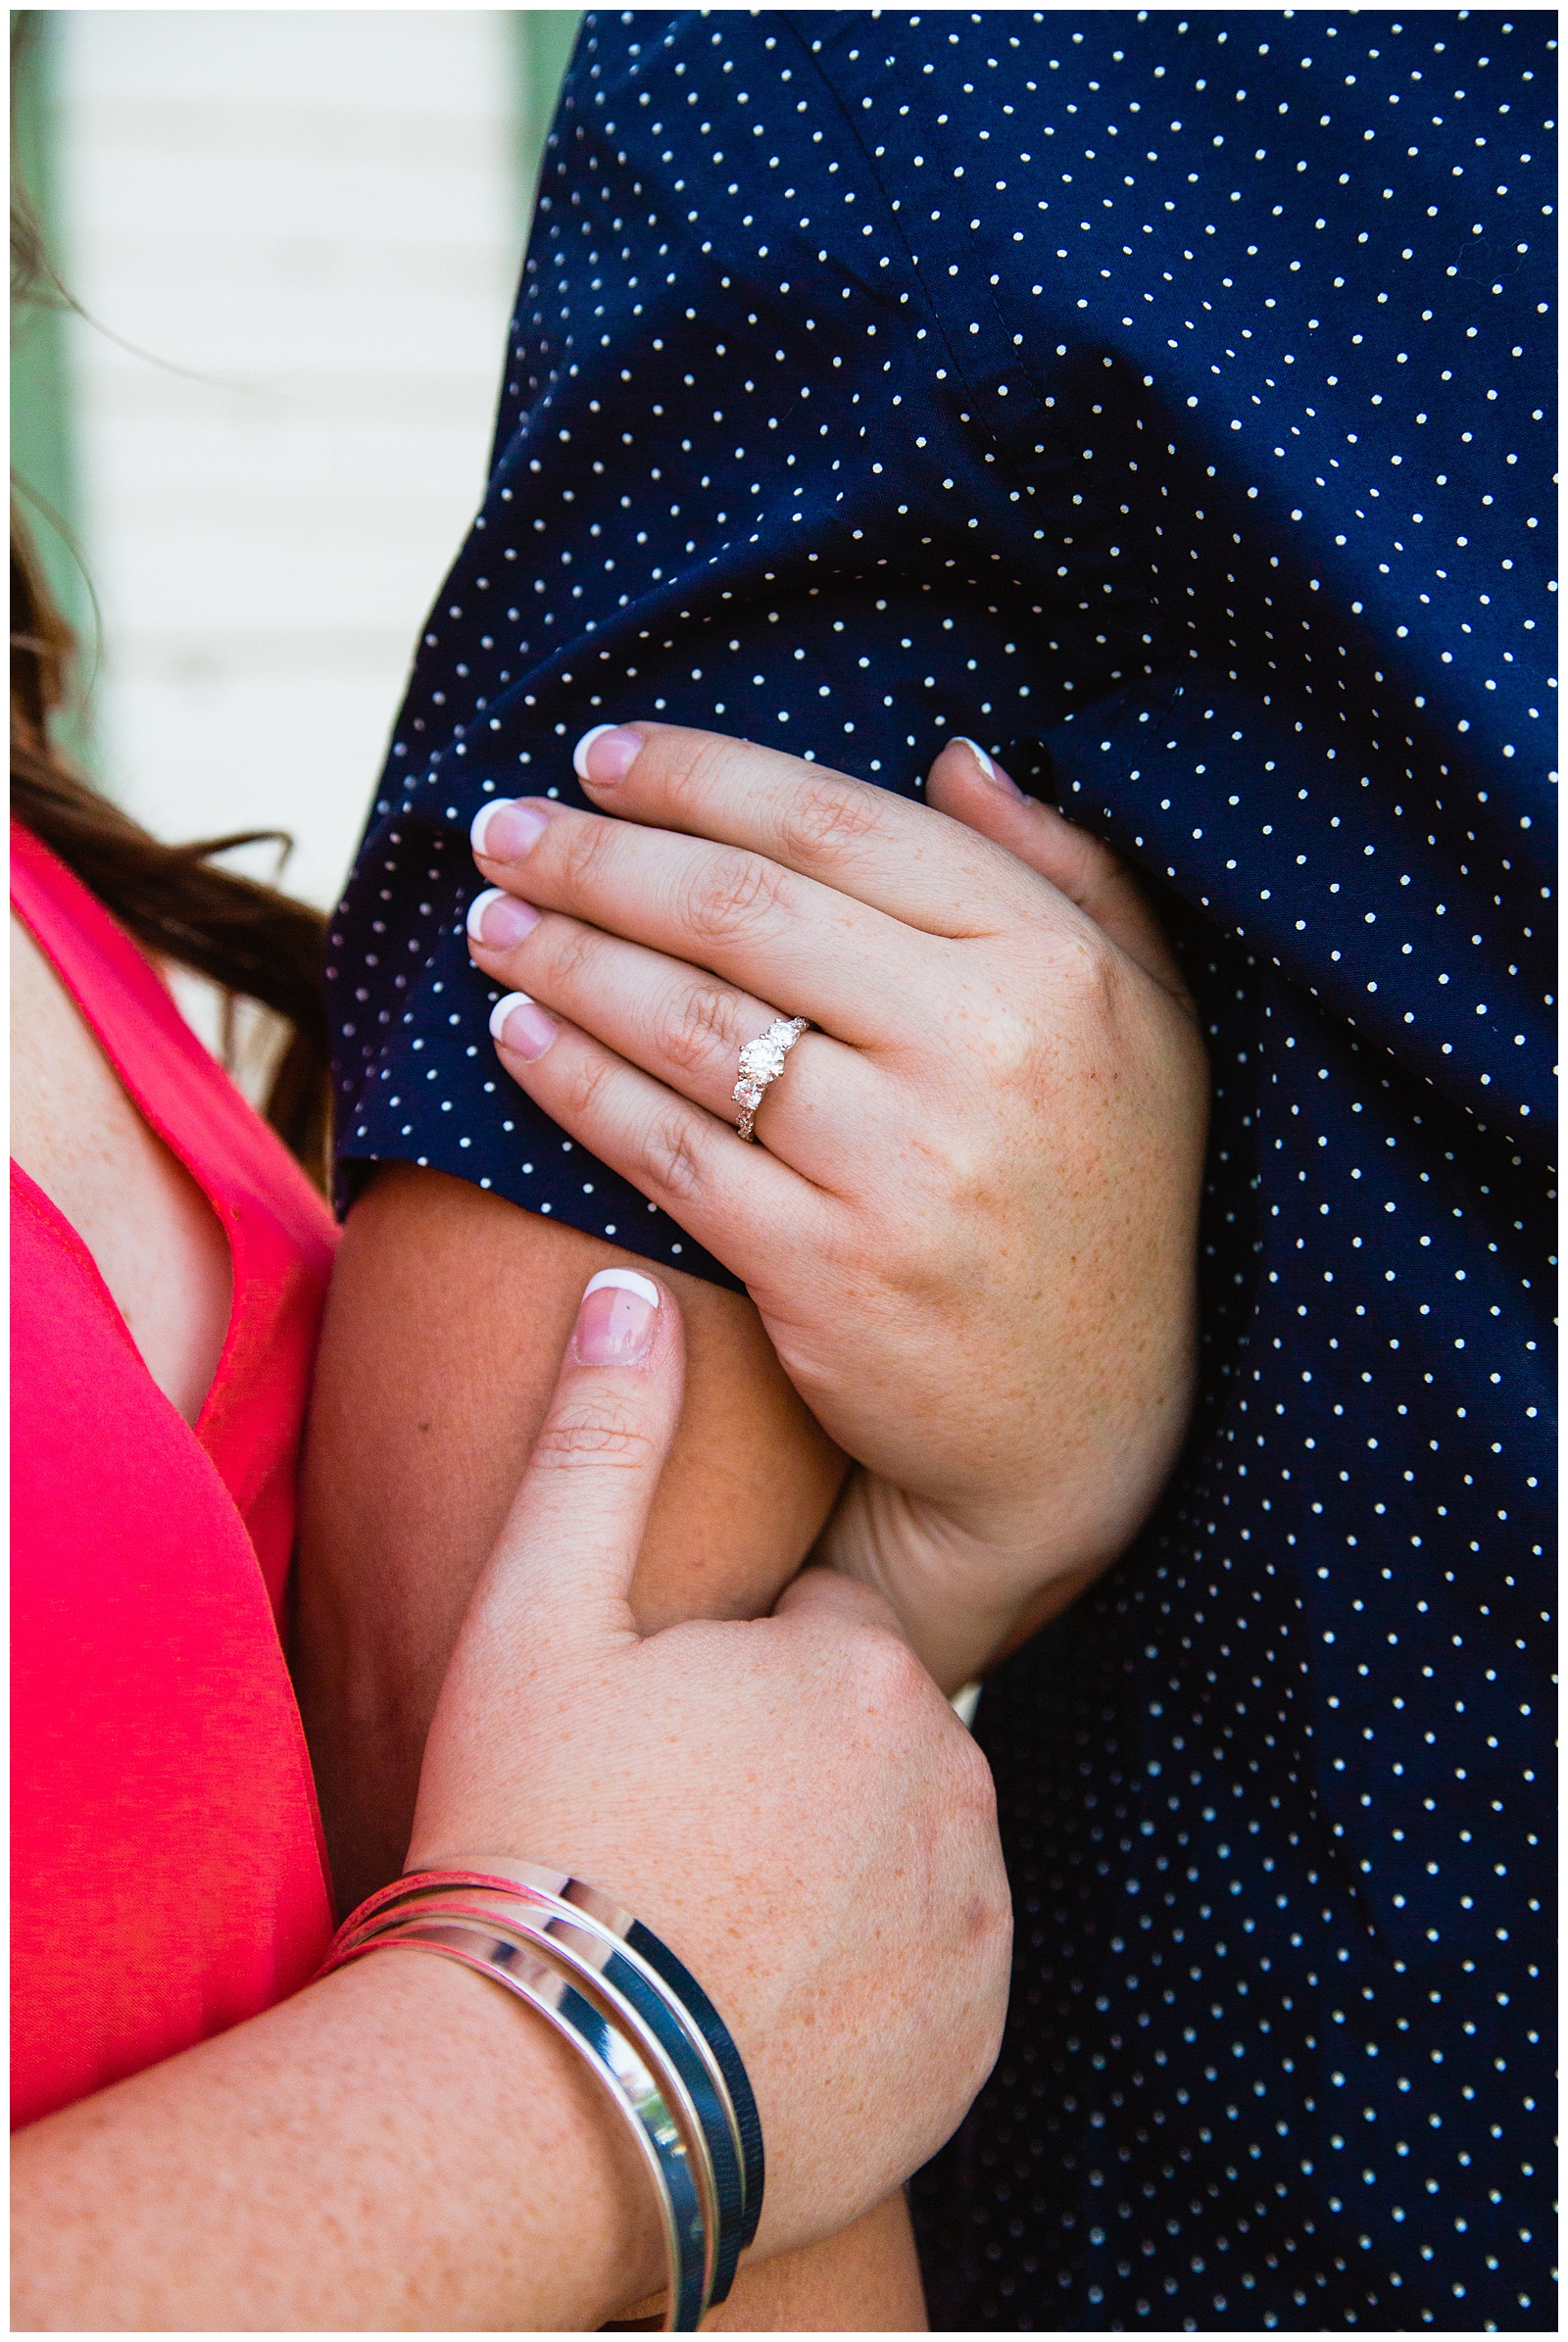 Detail image of couple's engagement session outfits by PMA Photography.